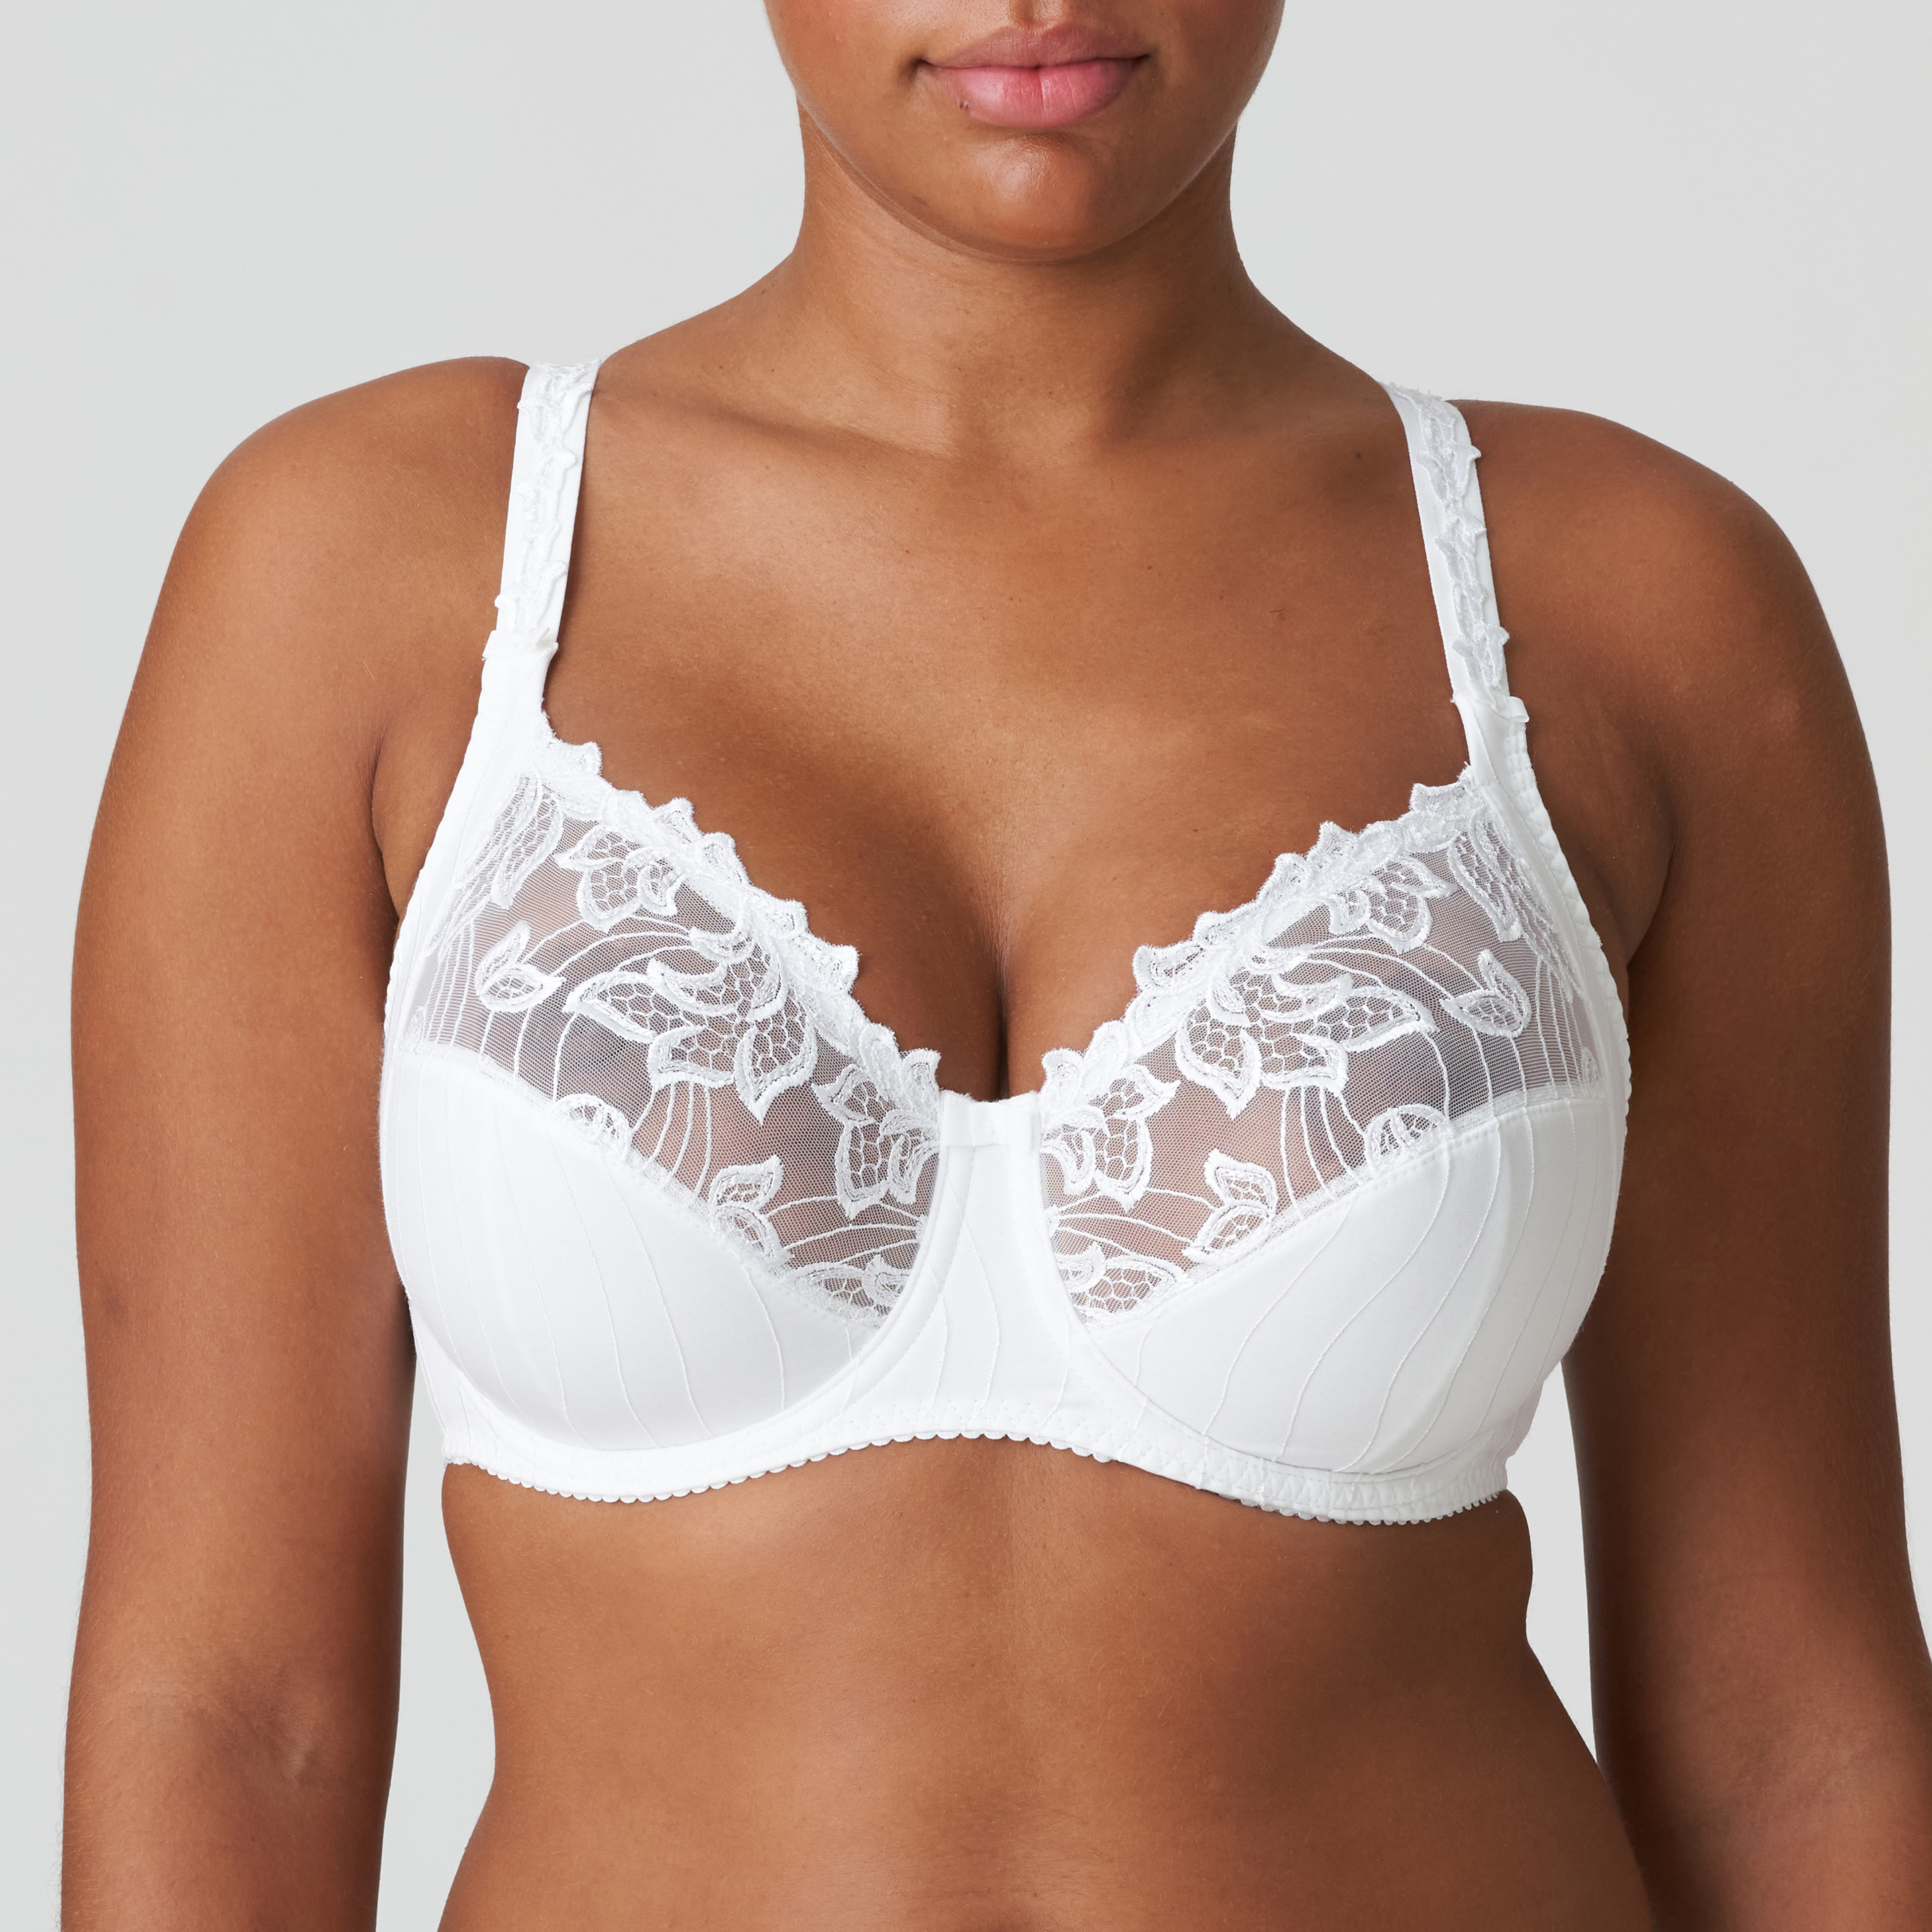 Wire bra First Lady Prima Donna couleur Blanc/bleu tailles 95 120